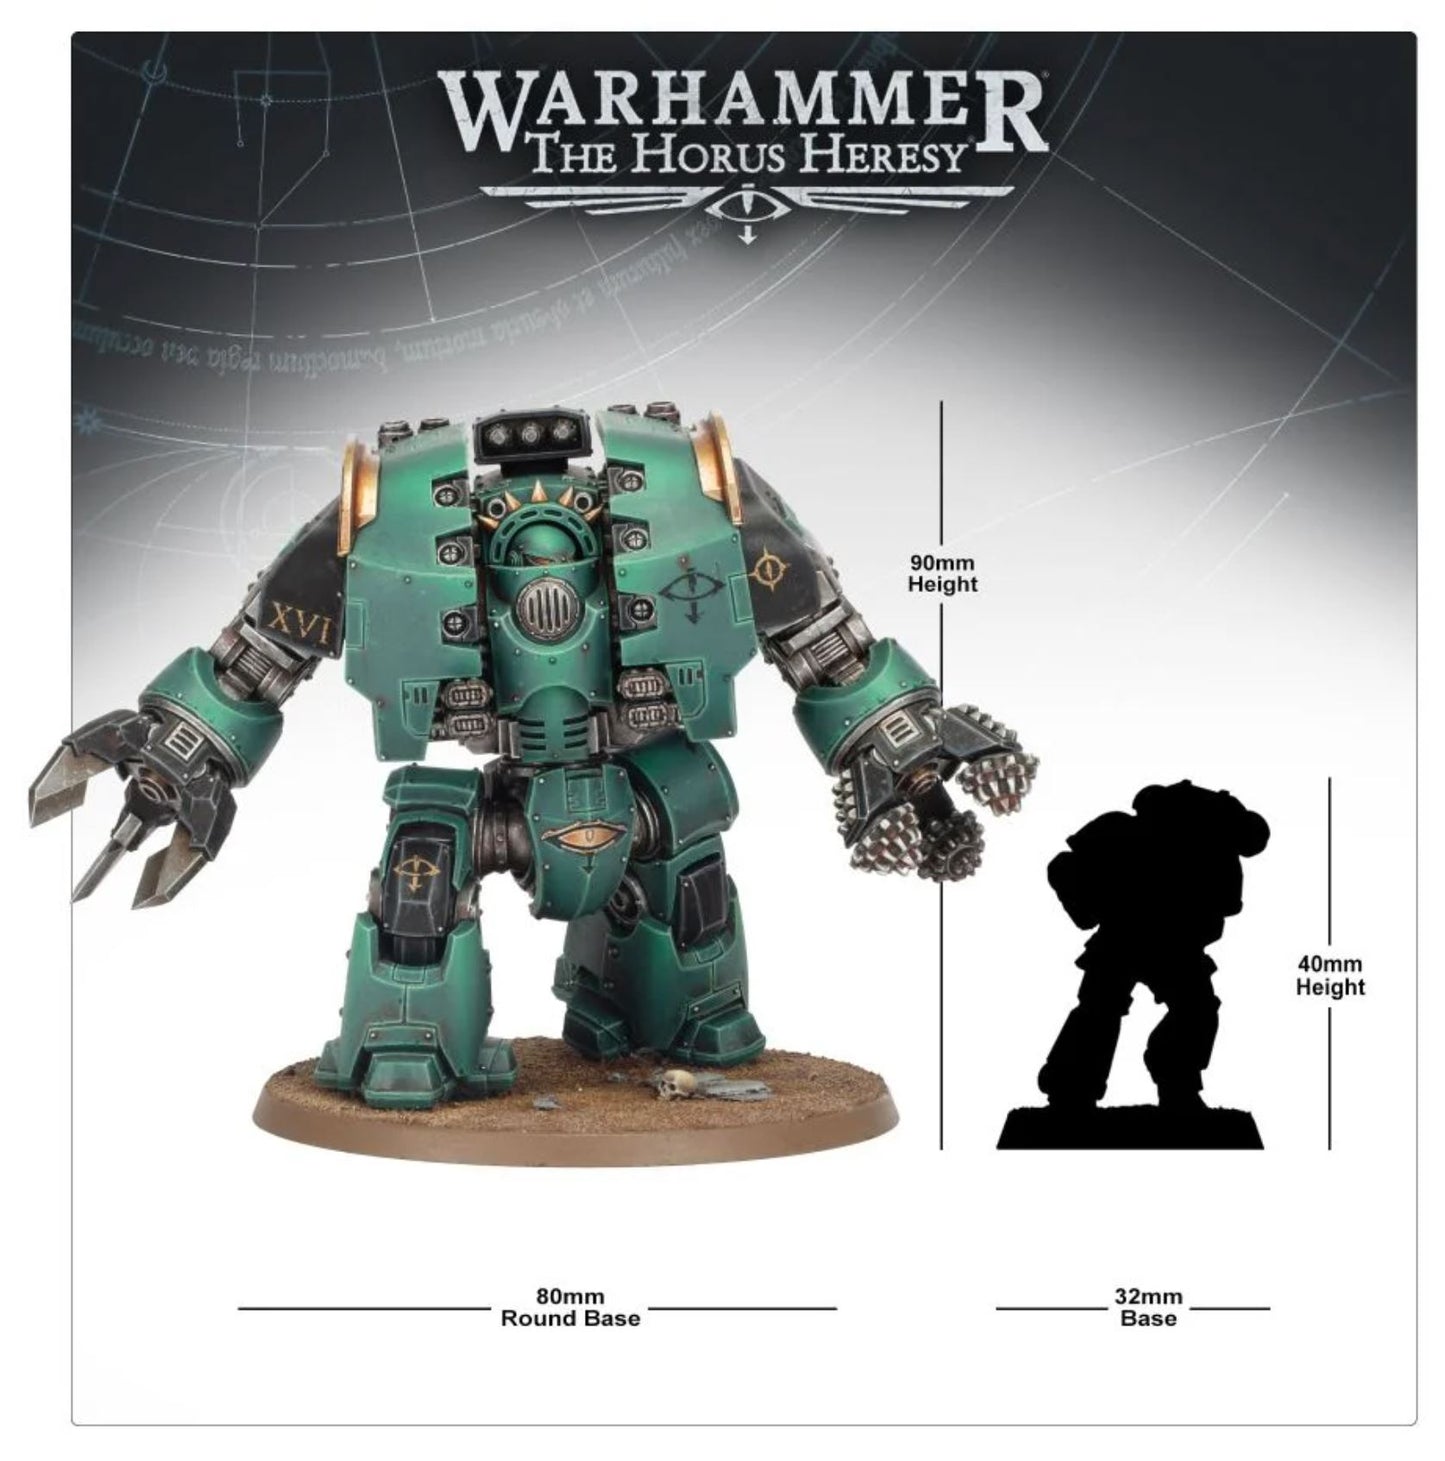 Horus Heresy - Leviathan Siege Dreadnought with Claw & Drill Weapons